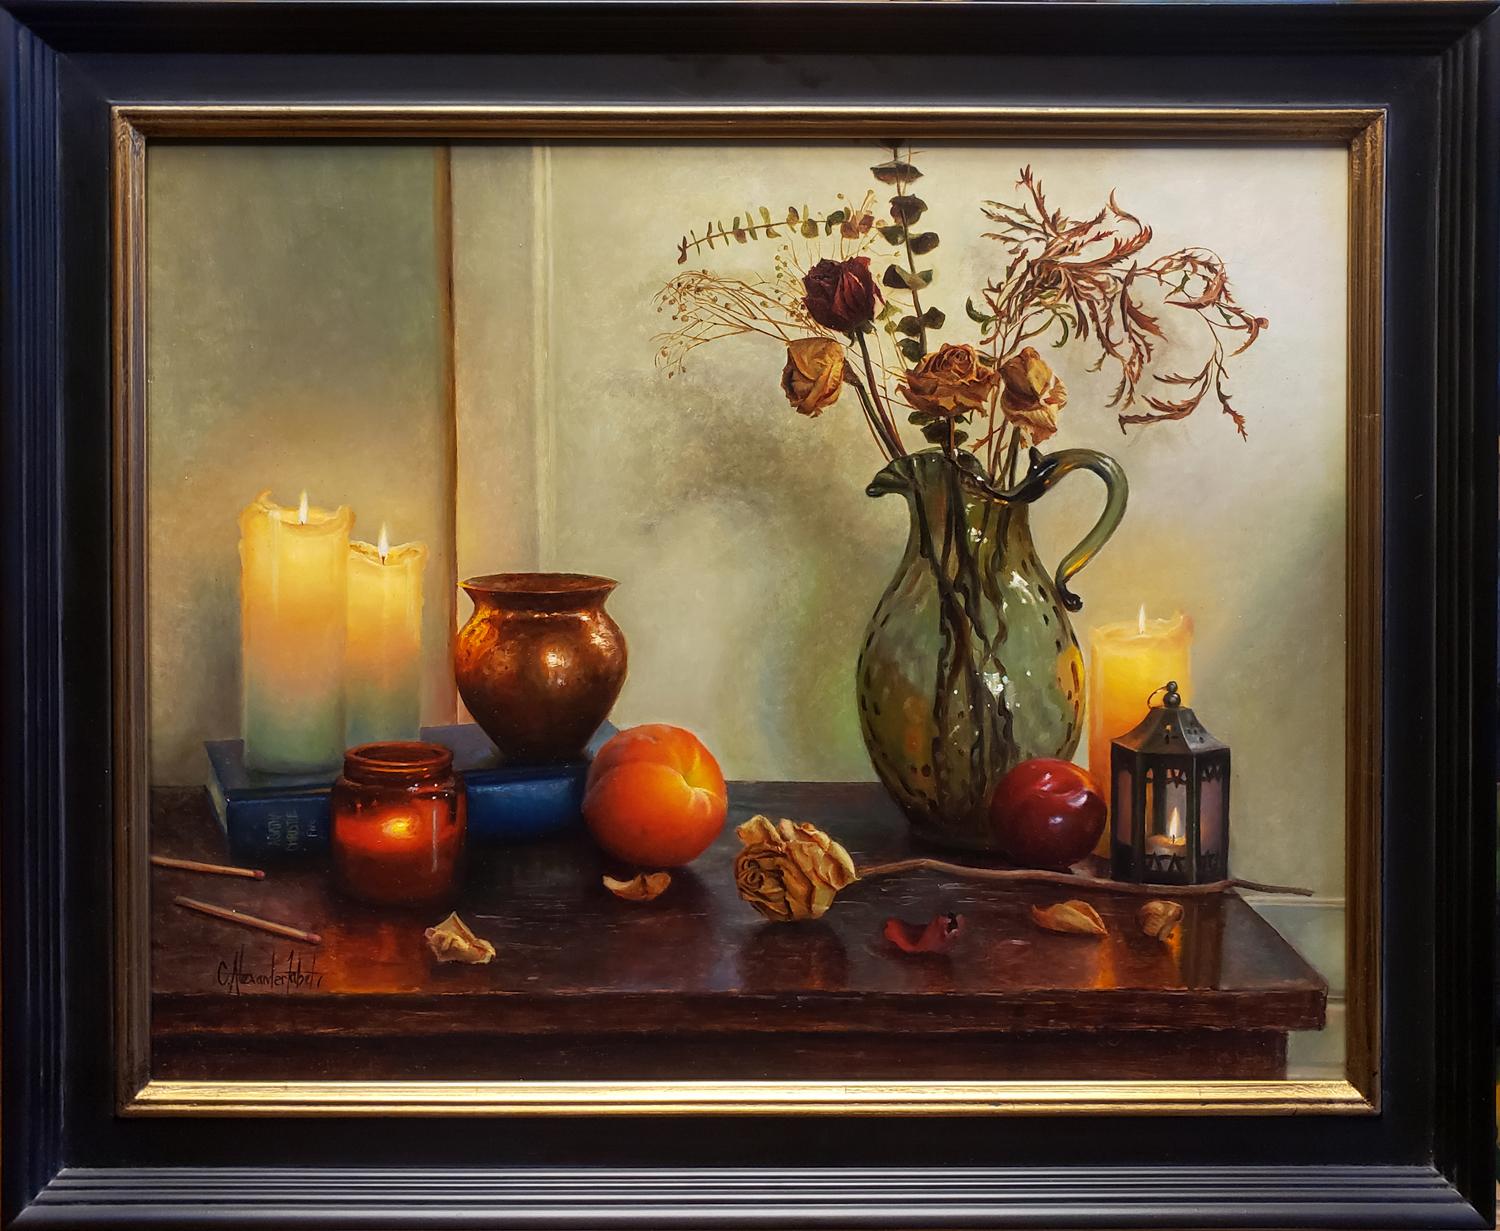 Autumn Roses - Painting by Alex Tabet